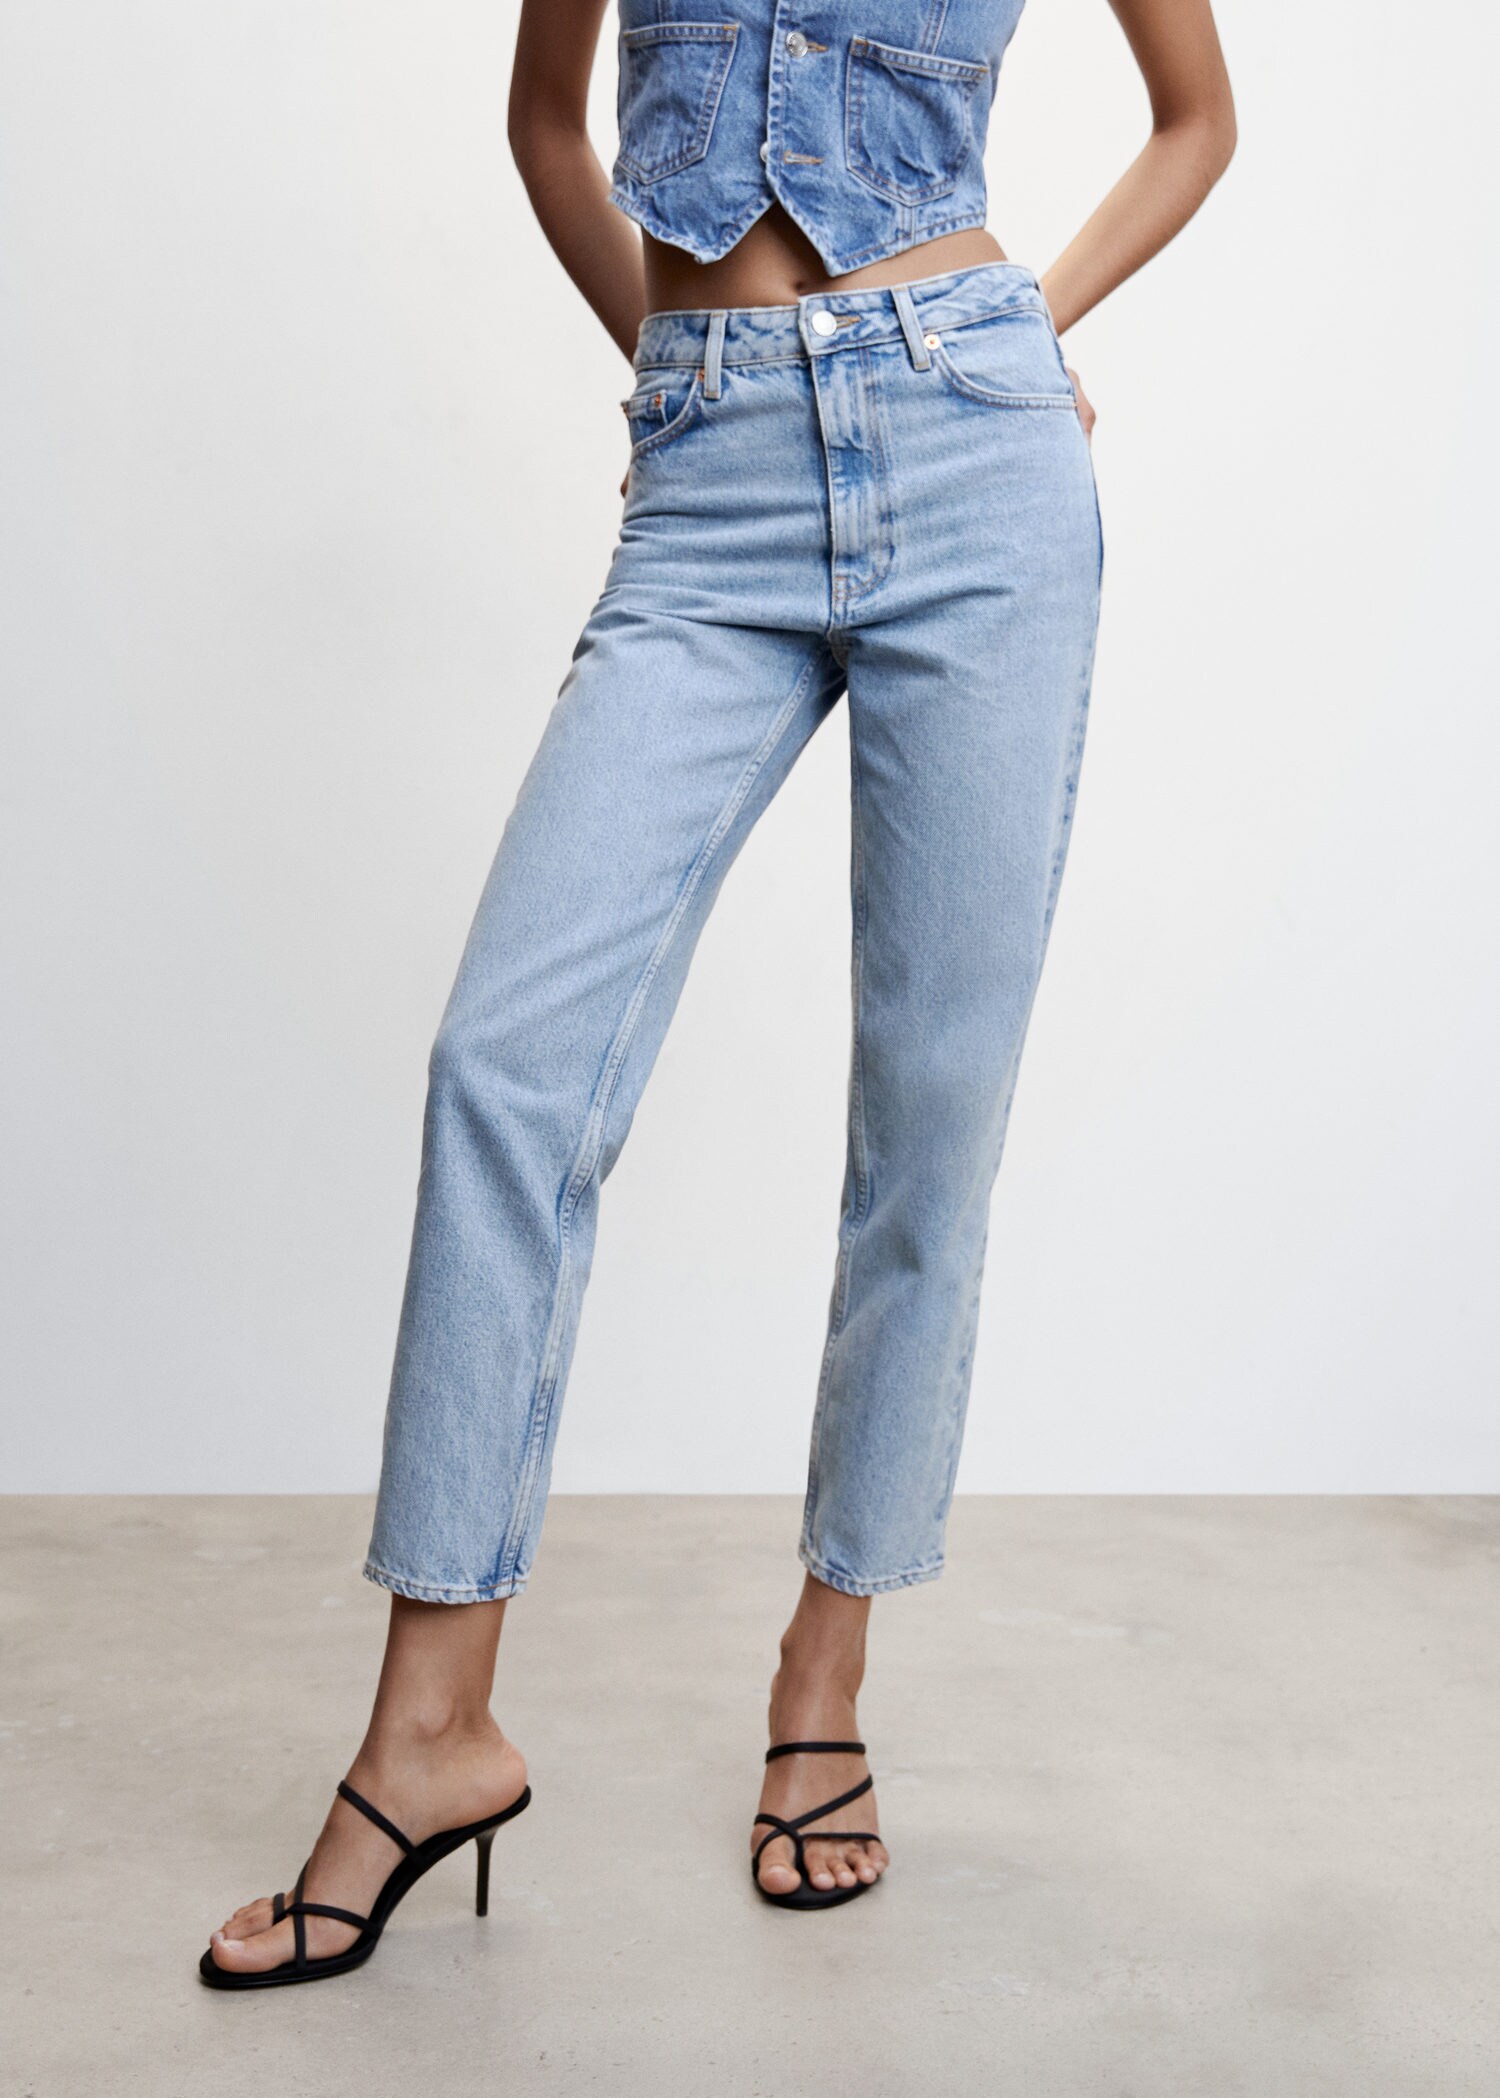 Moda Xpress Ultra High Waisted Jeans for Women - India | Ubuy